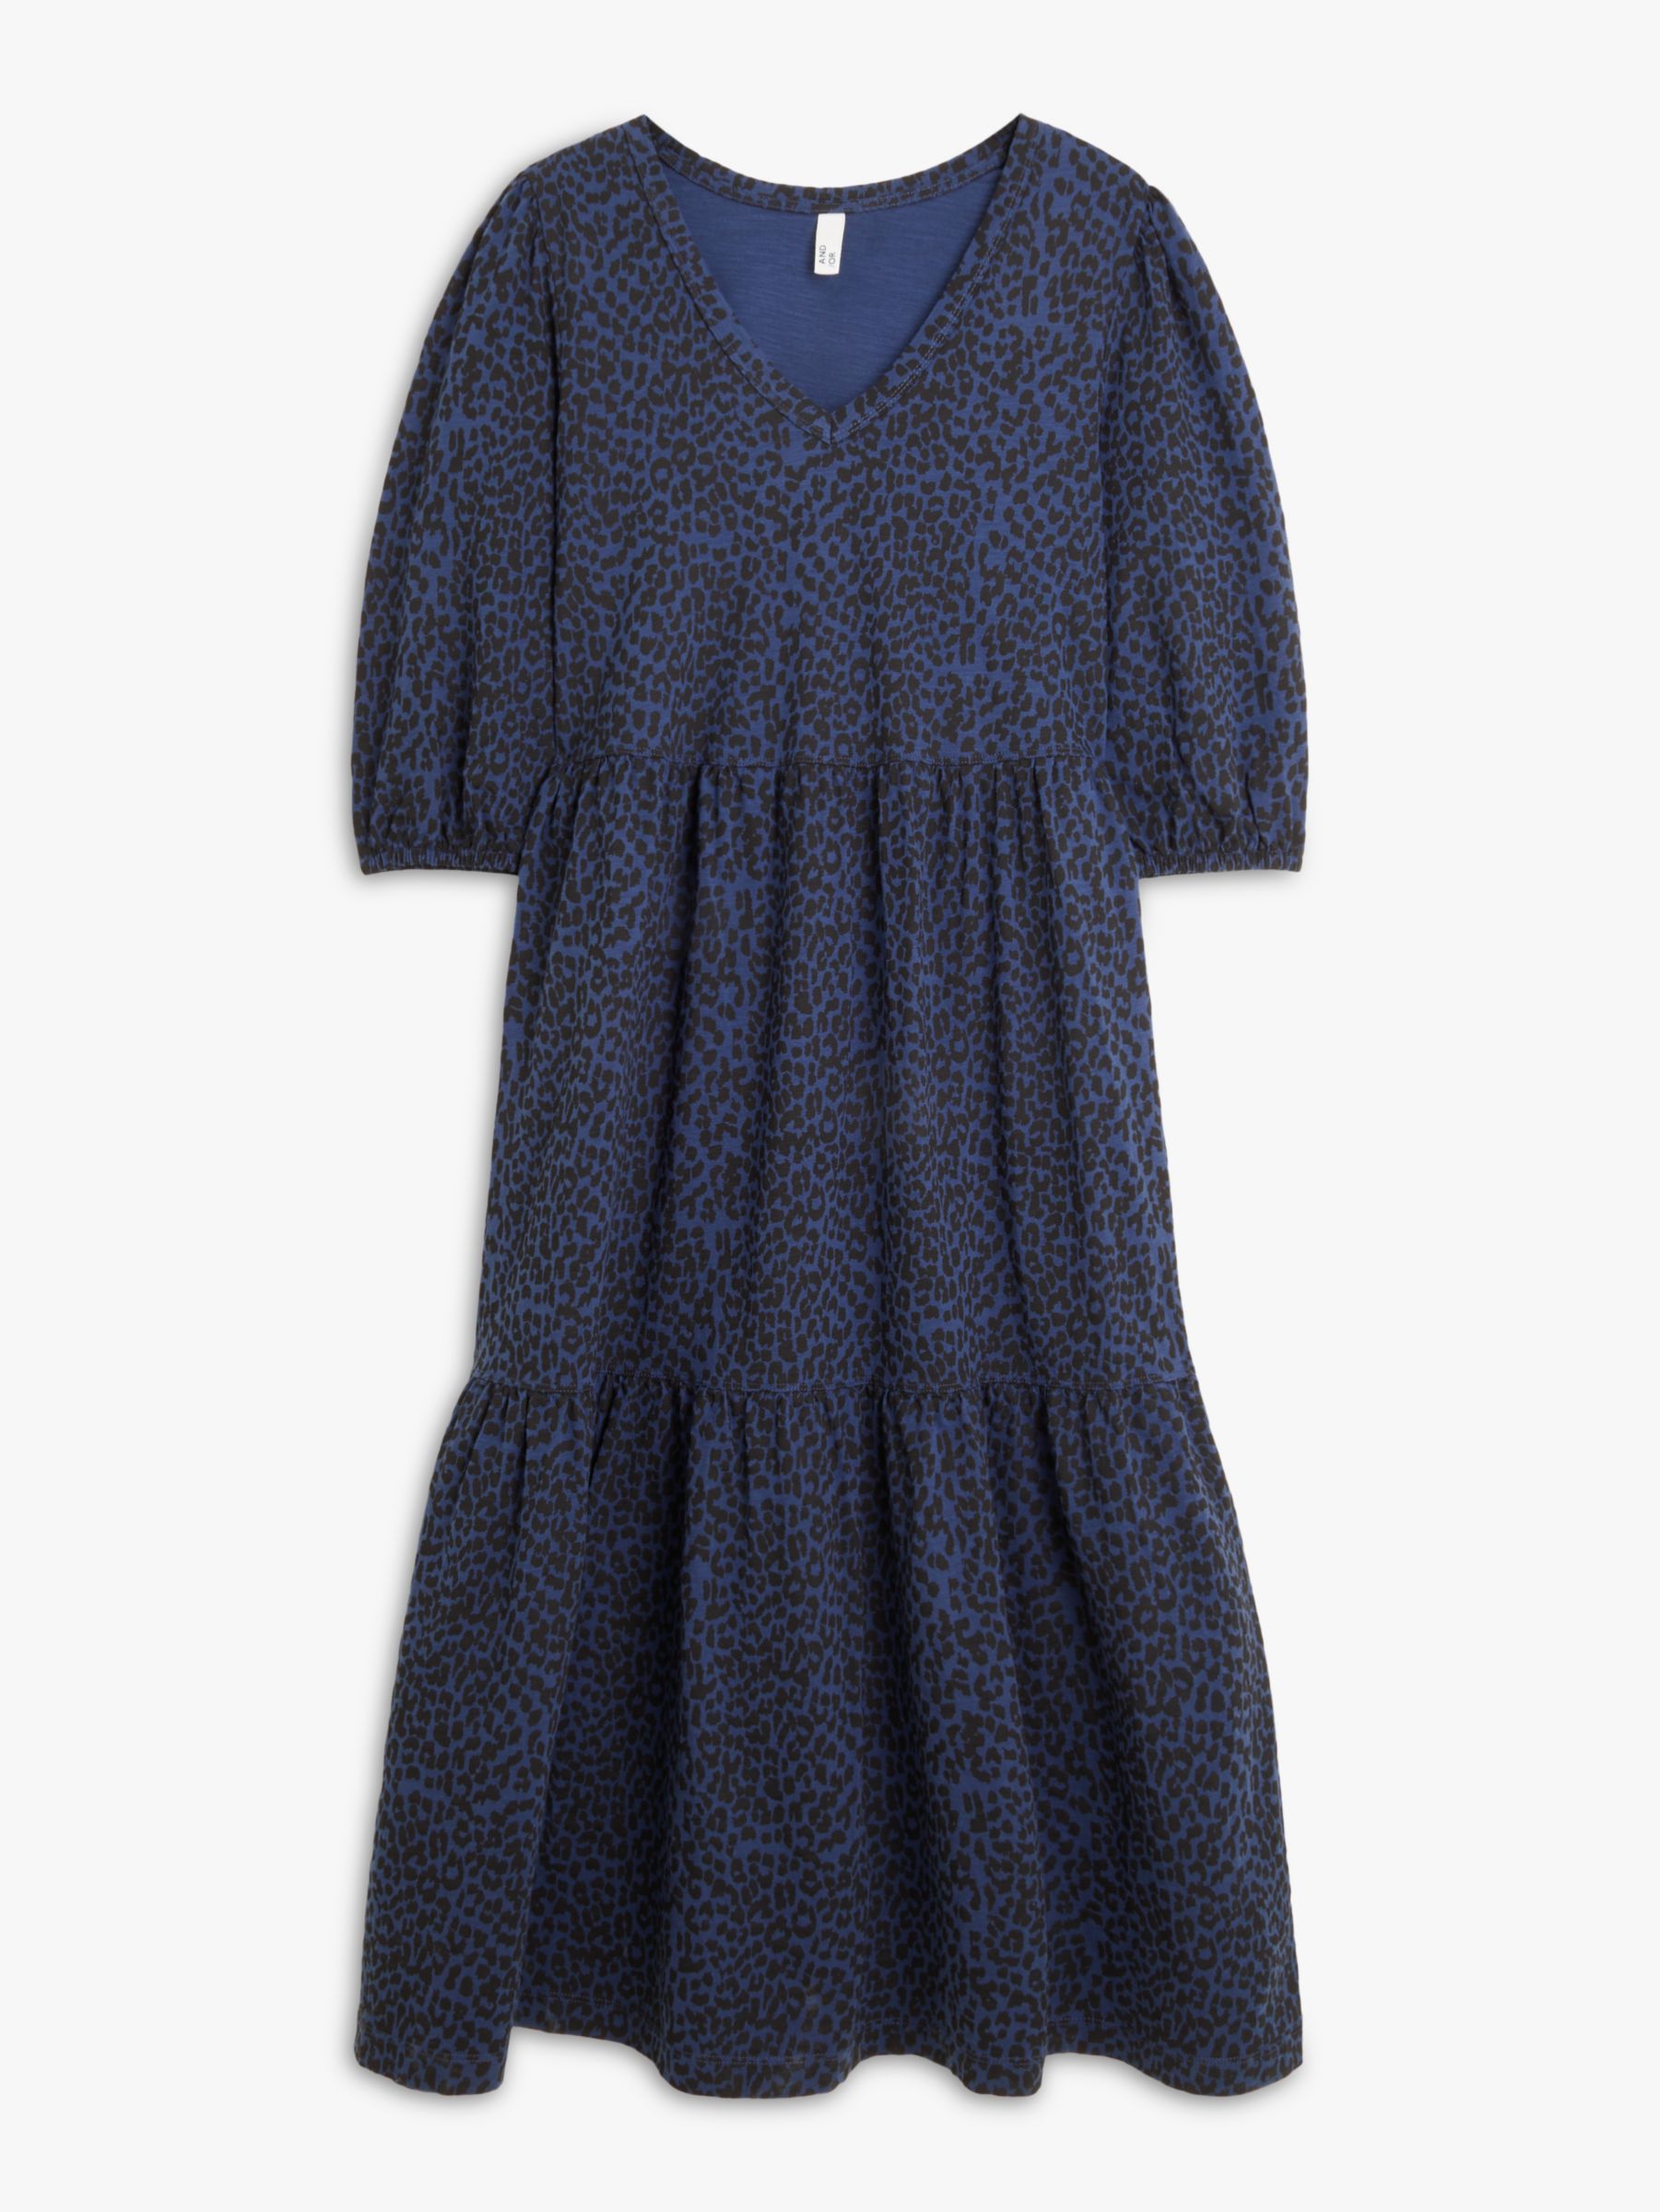 AND/OR Brielle Animal Print Tiered Jersey Dress, Blue, 6